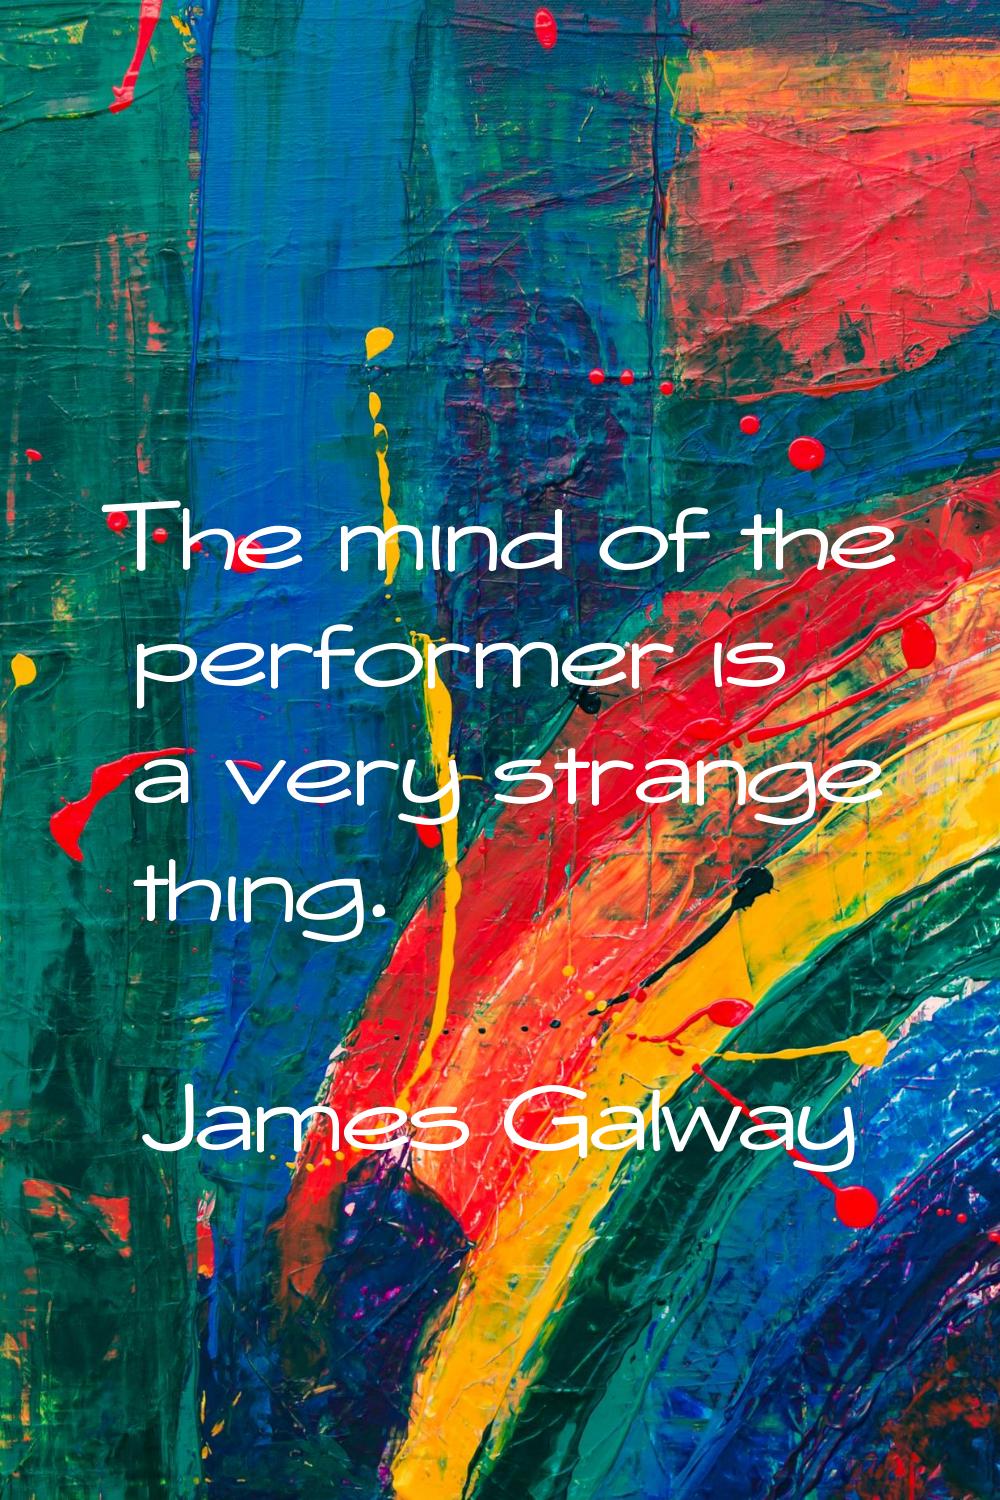 The mind of the performer is a very strange thing.